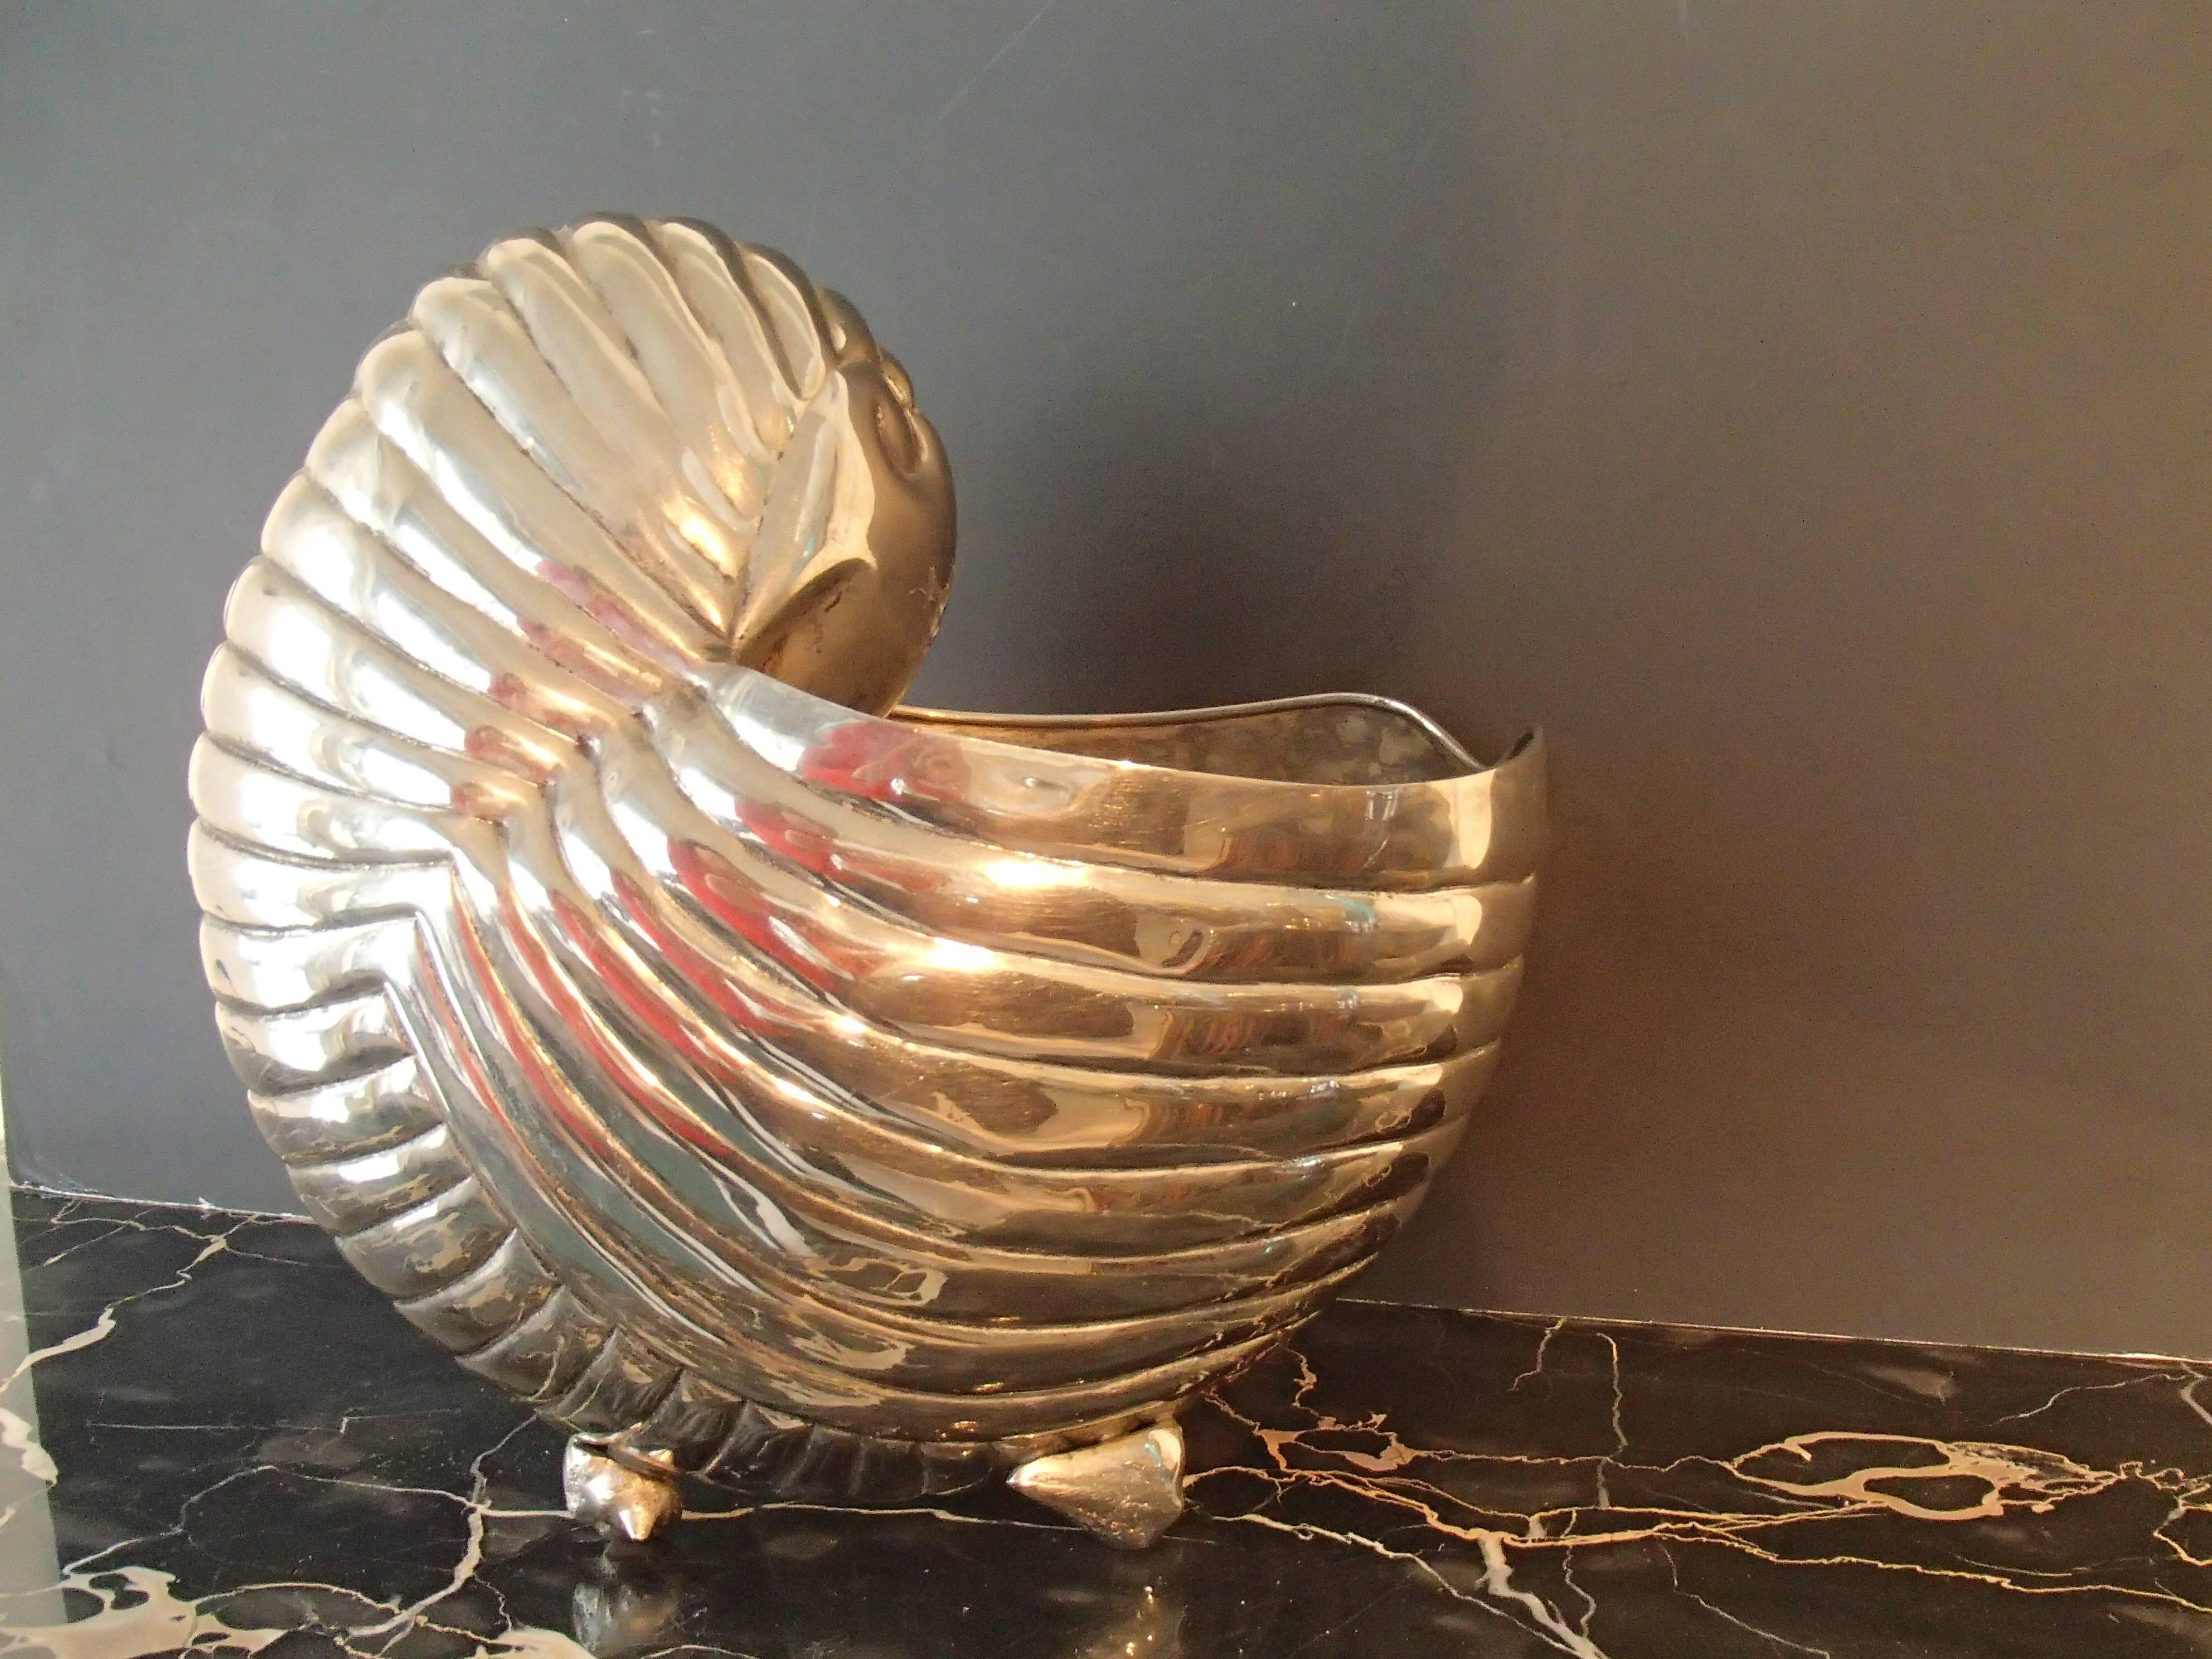 Modern Champagne or Vine Cooler like a Shell Seen in 